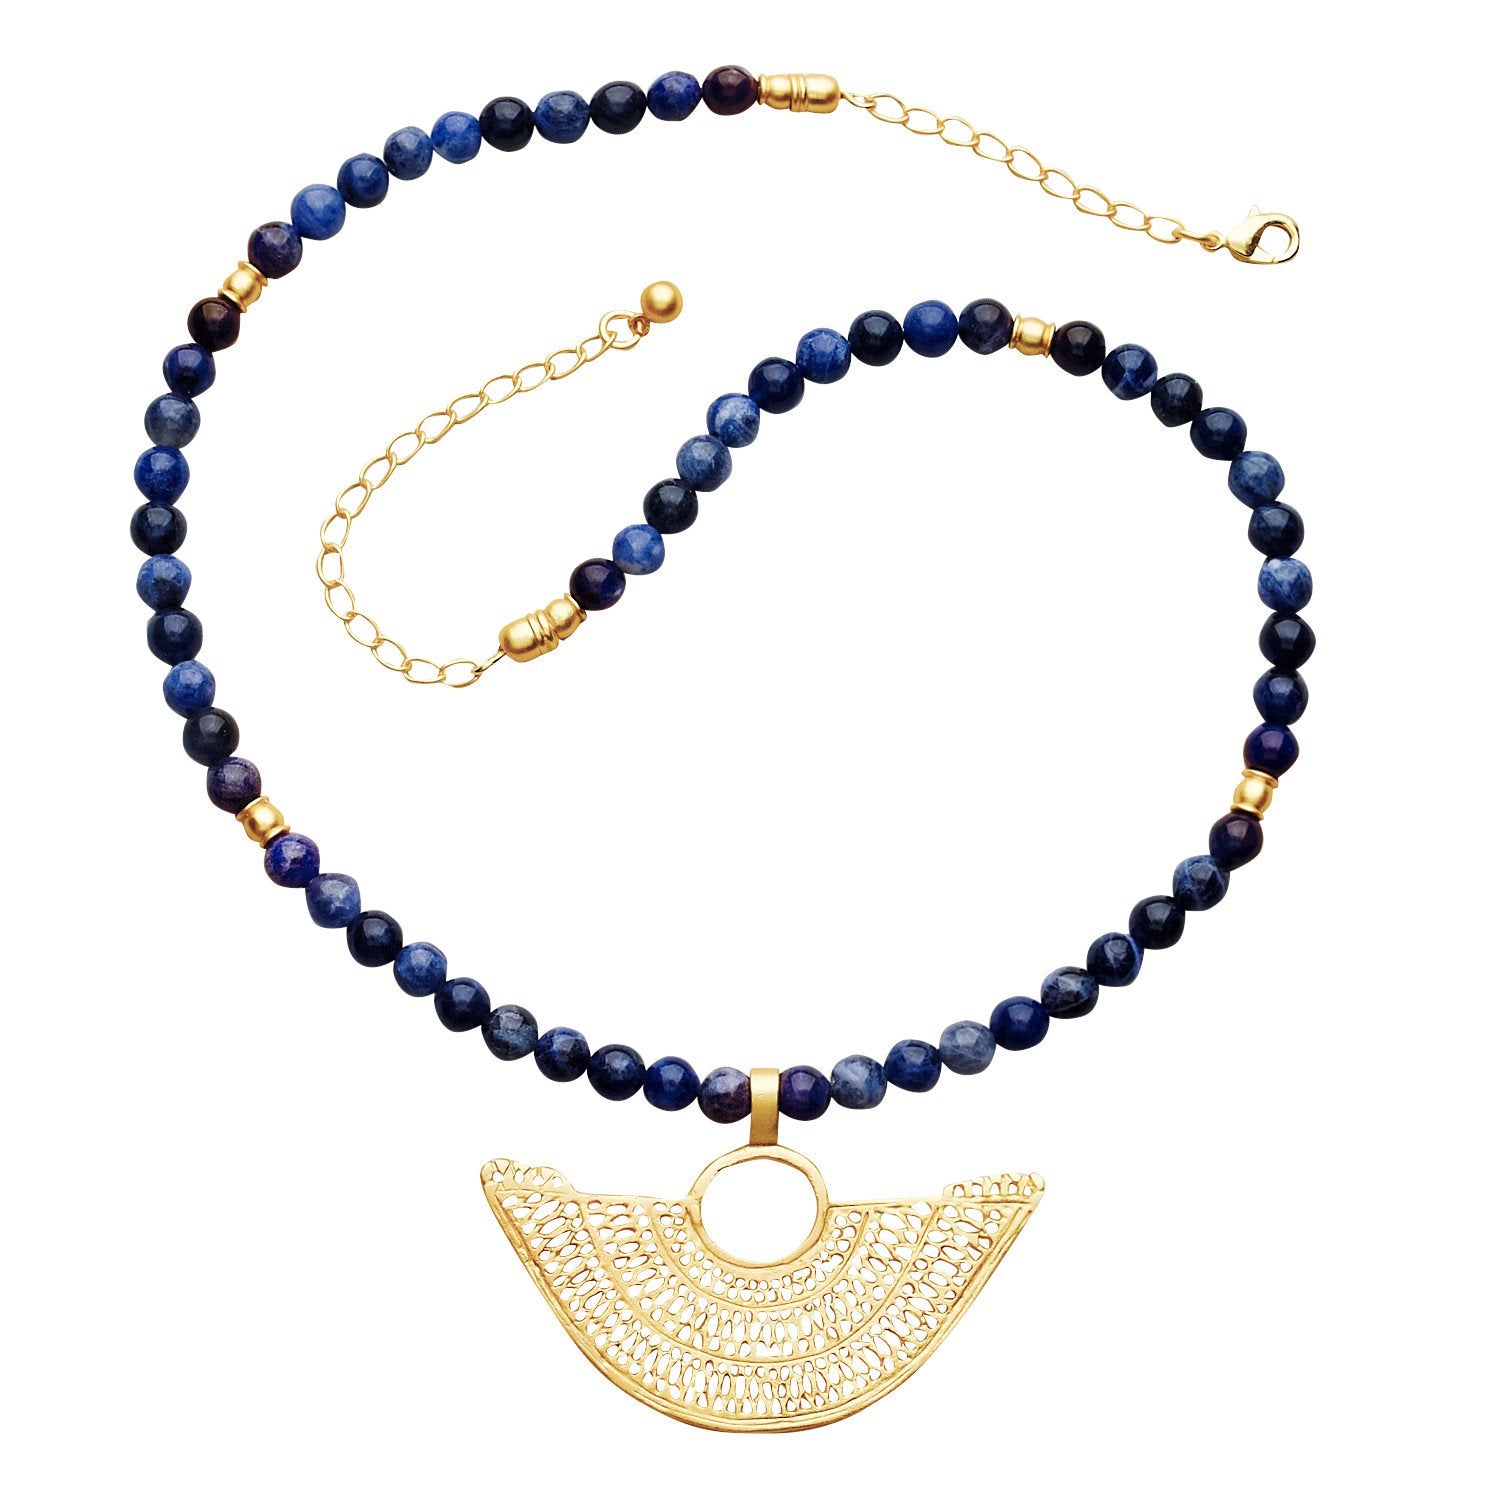 Authentic Fair Trade Product. Ethically sourced. Handcrafted in Colombia. 24K Gold Fill